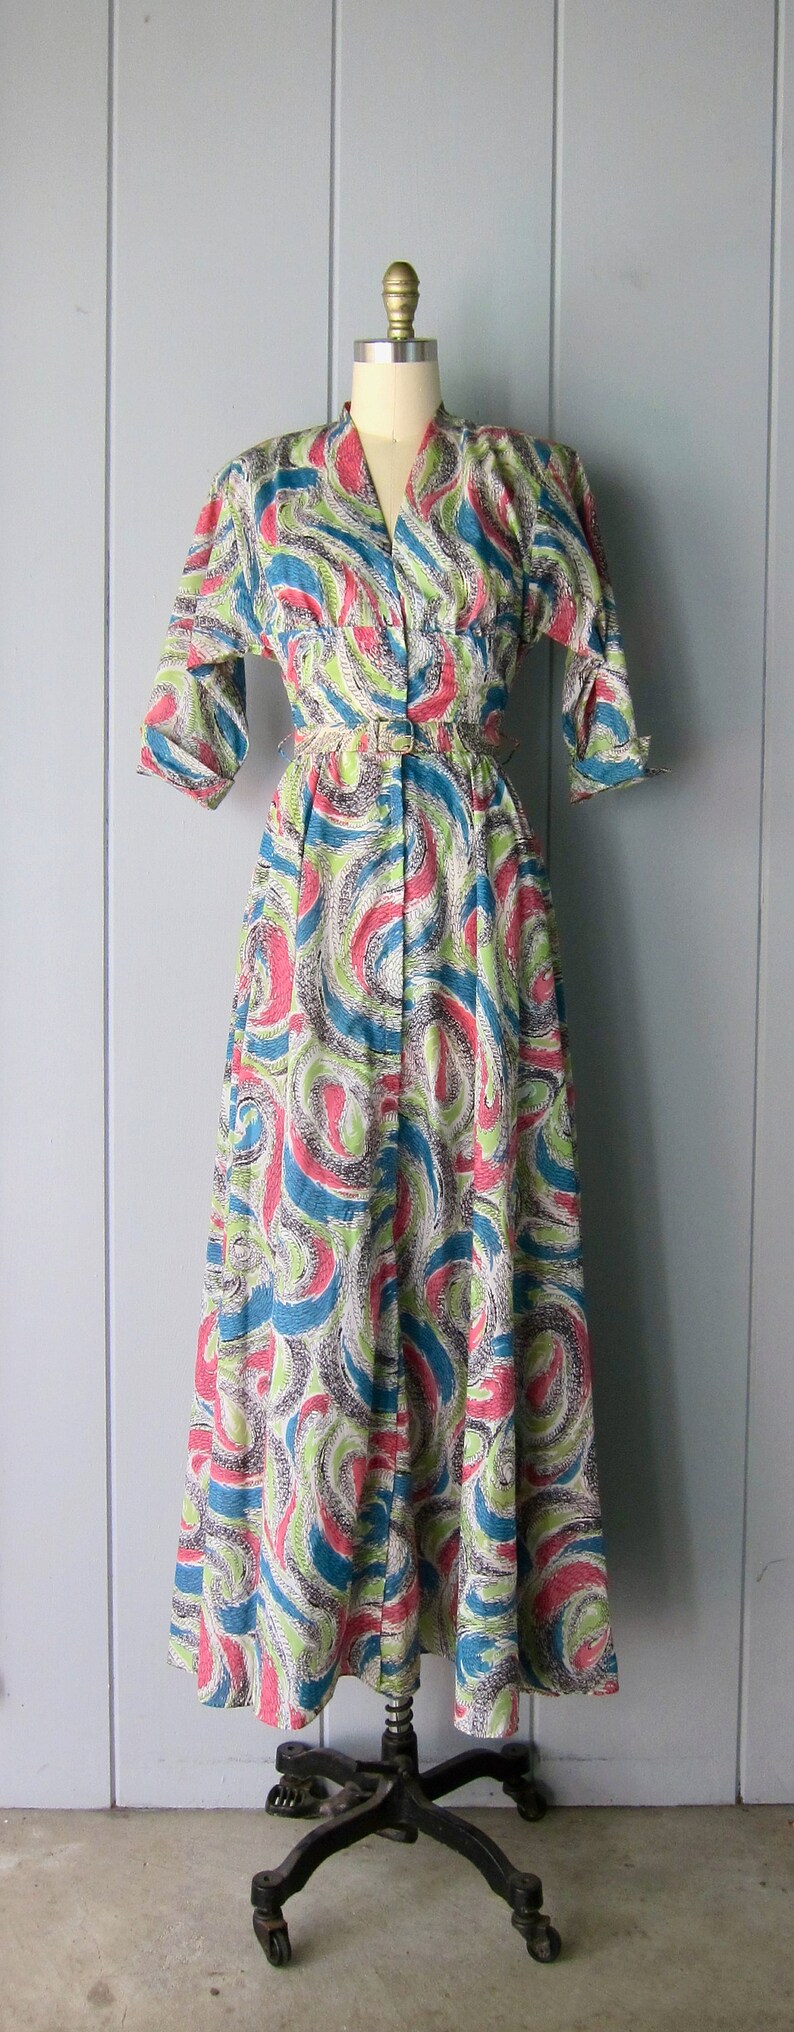 Colorful Printed 40s Lounge Dress with Front Zipper 1940s Dress Vintage Loungewear Dress Belted Robe Slip Dress